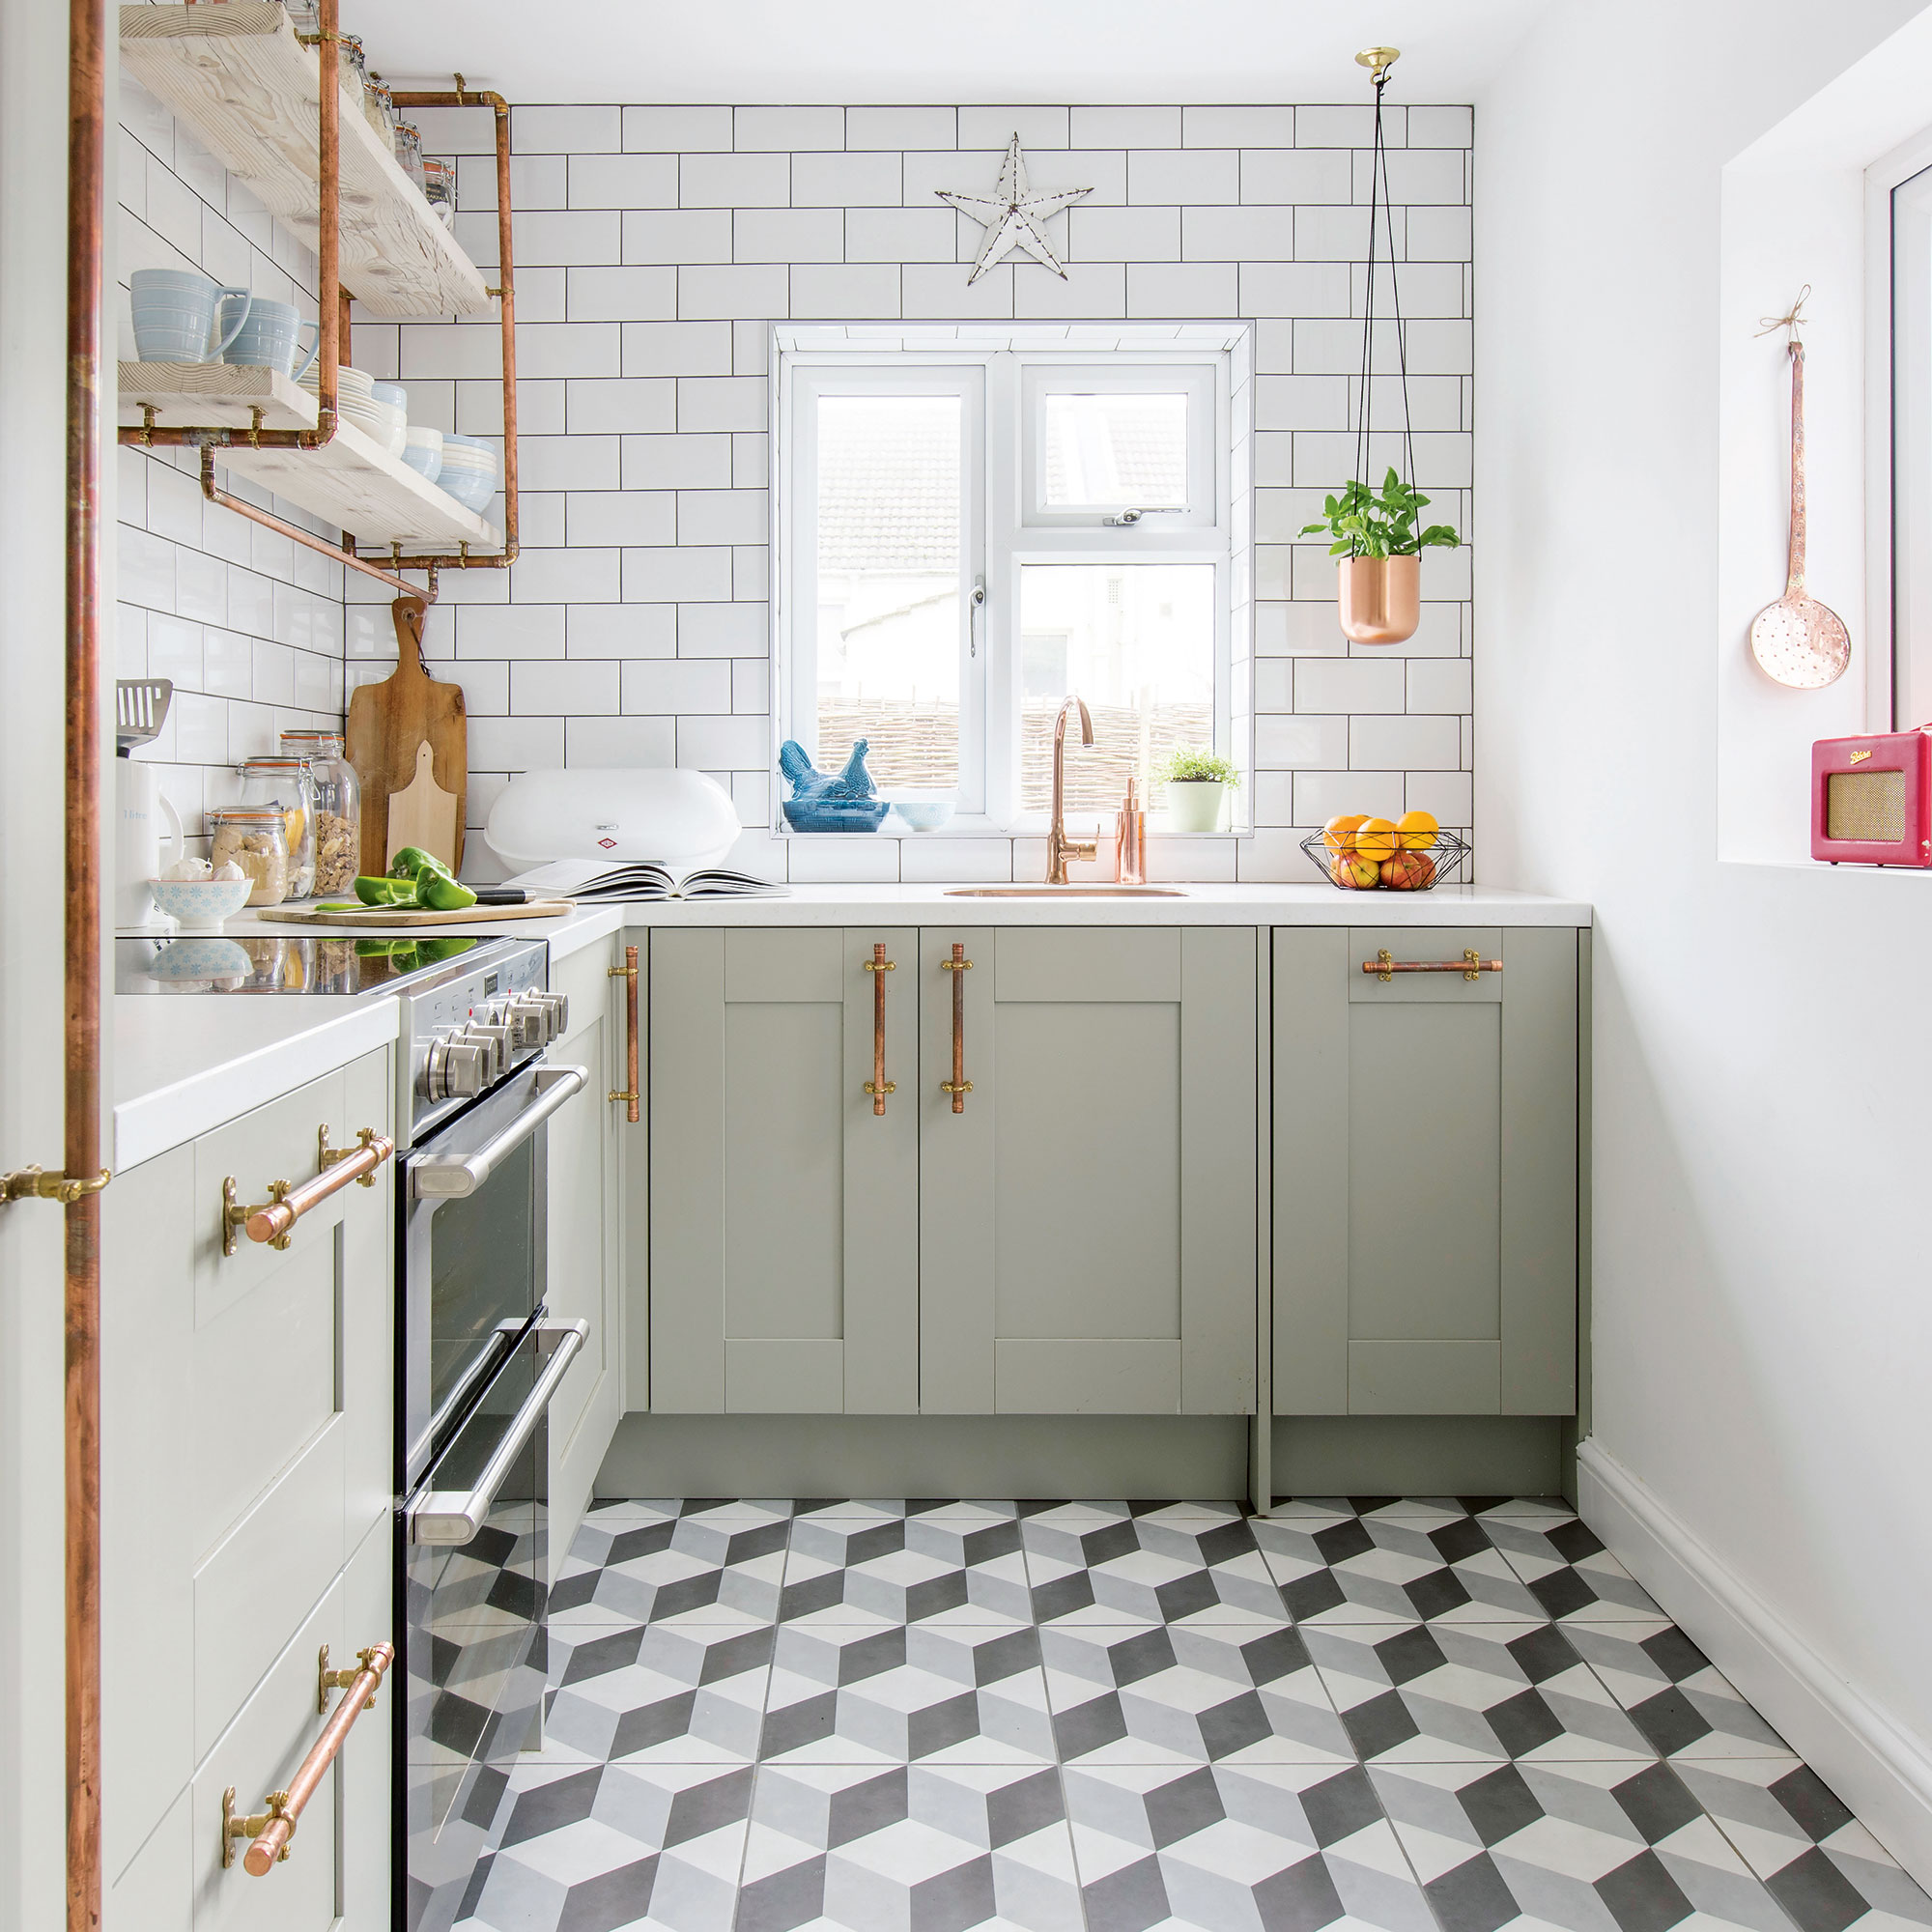 Neutral kitchen with geometric tiled floor, metro tiled walls and grey cabinetry